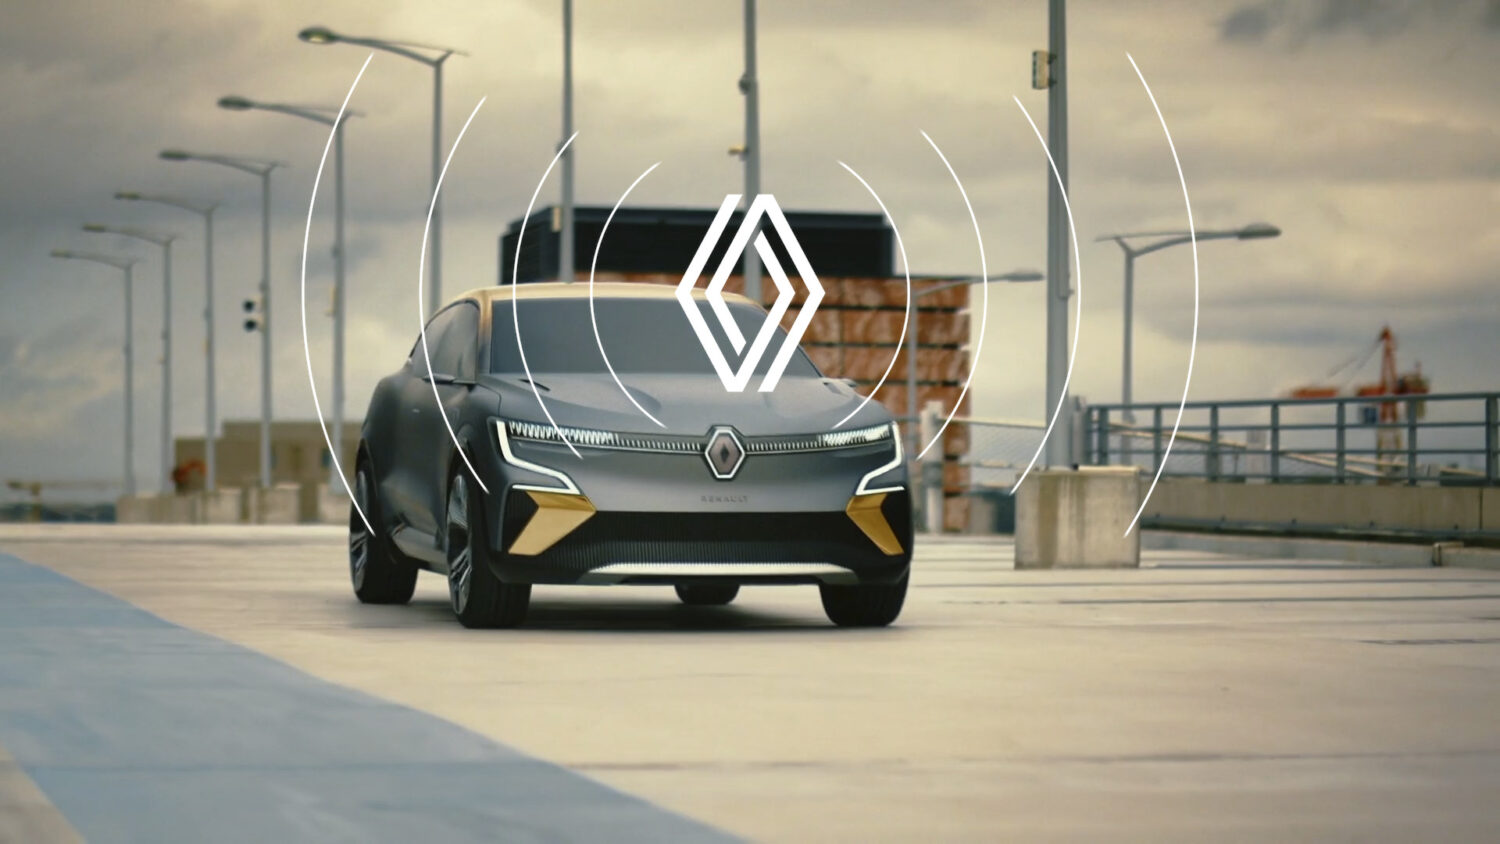 2021 - Story Renault, in tune with the sound - Episode 2 : The voice of electric vehicles